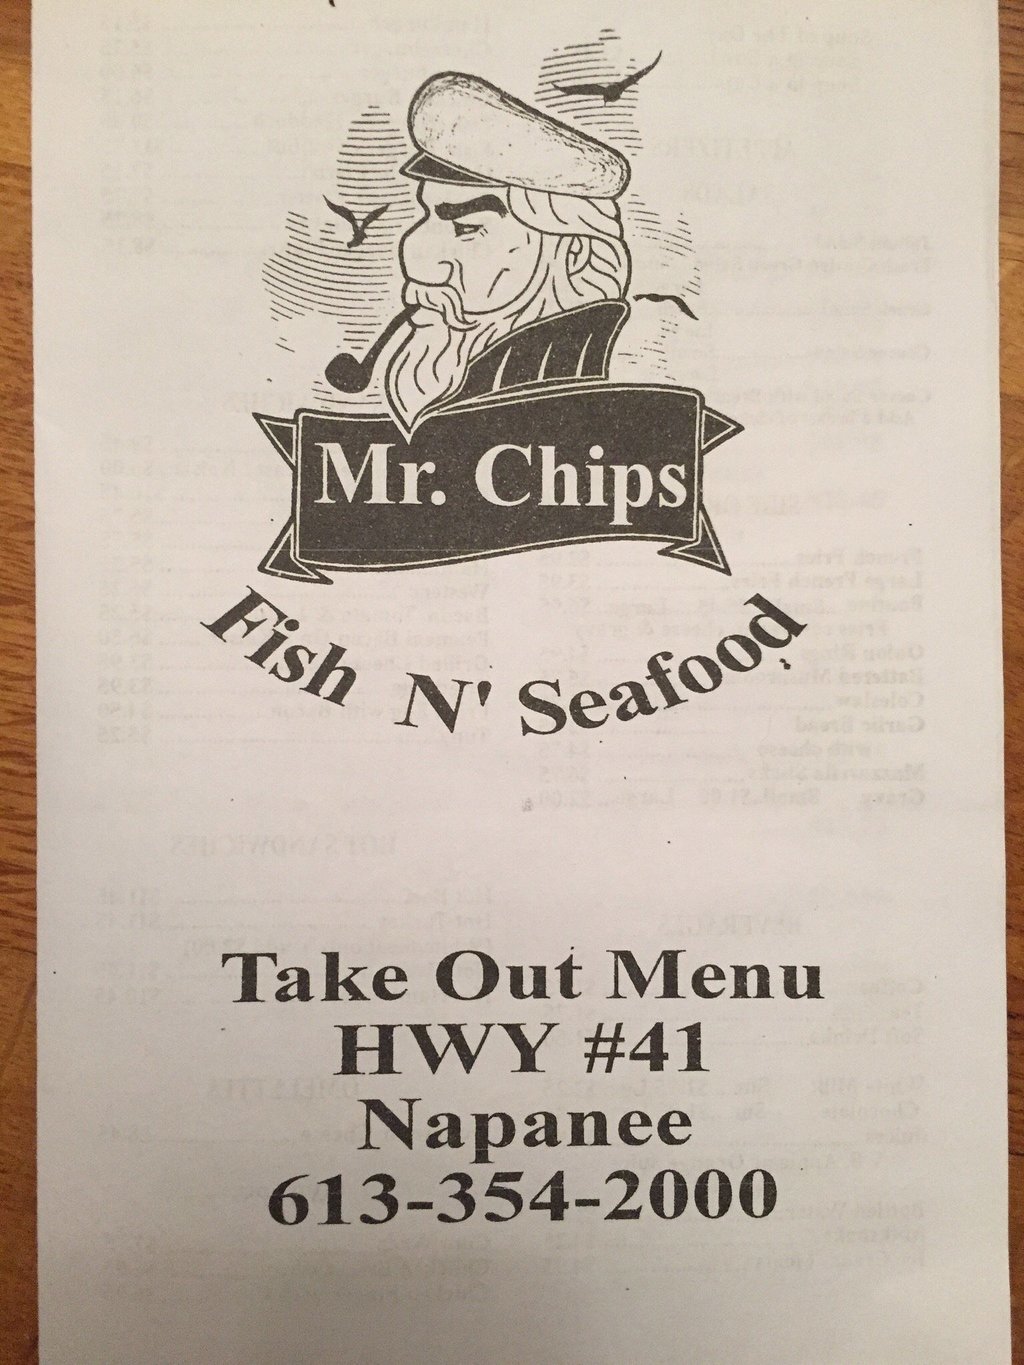 Mr. Chips Fish N` Seafood